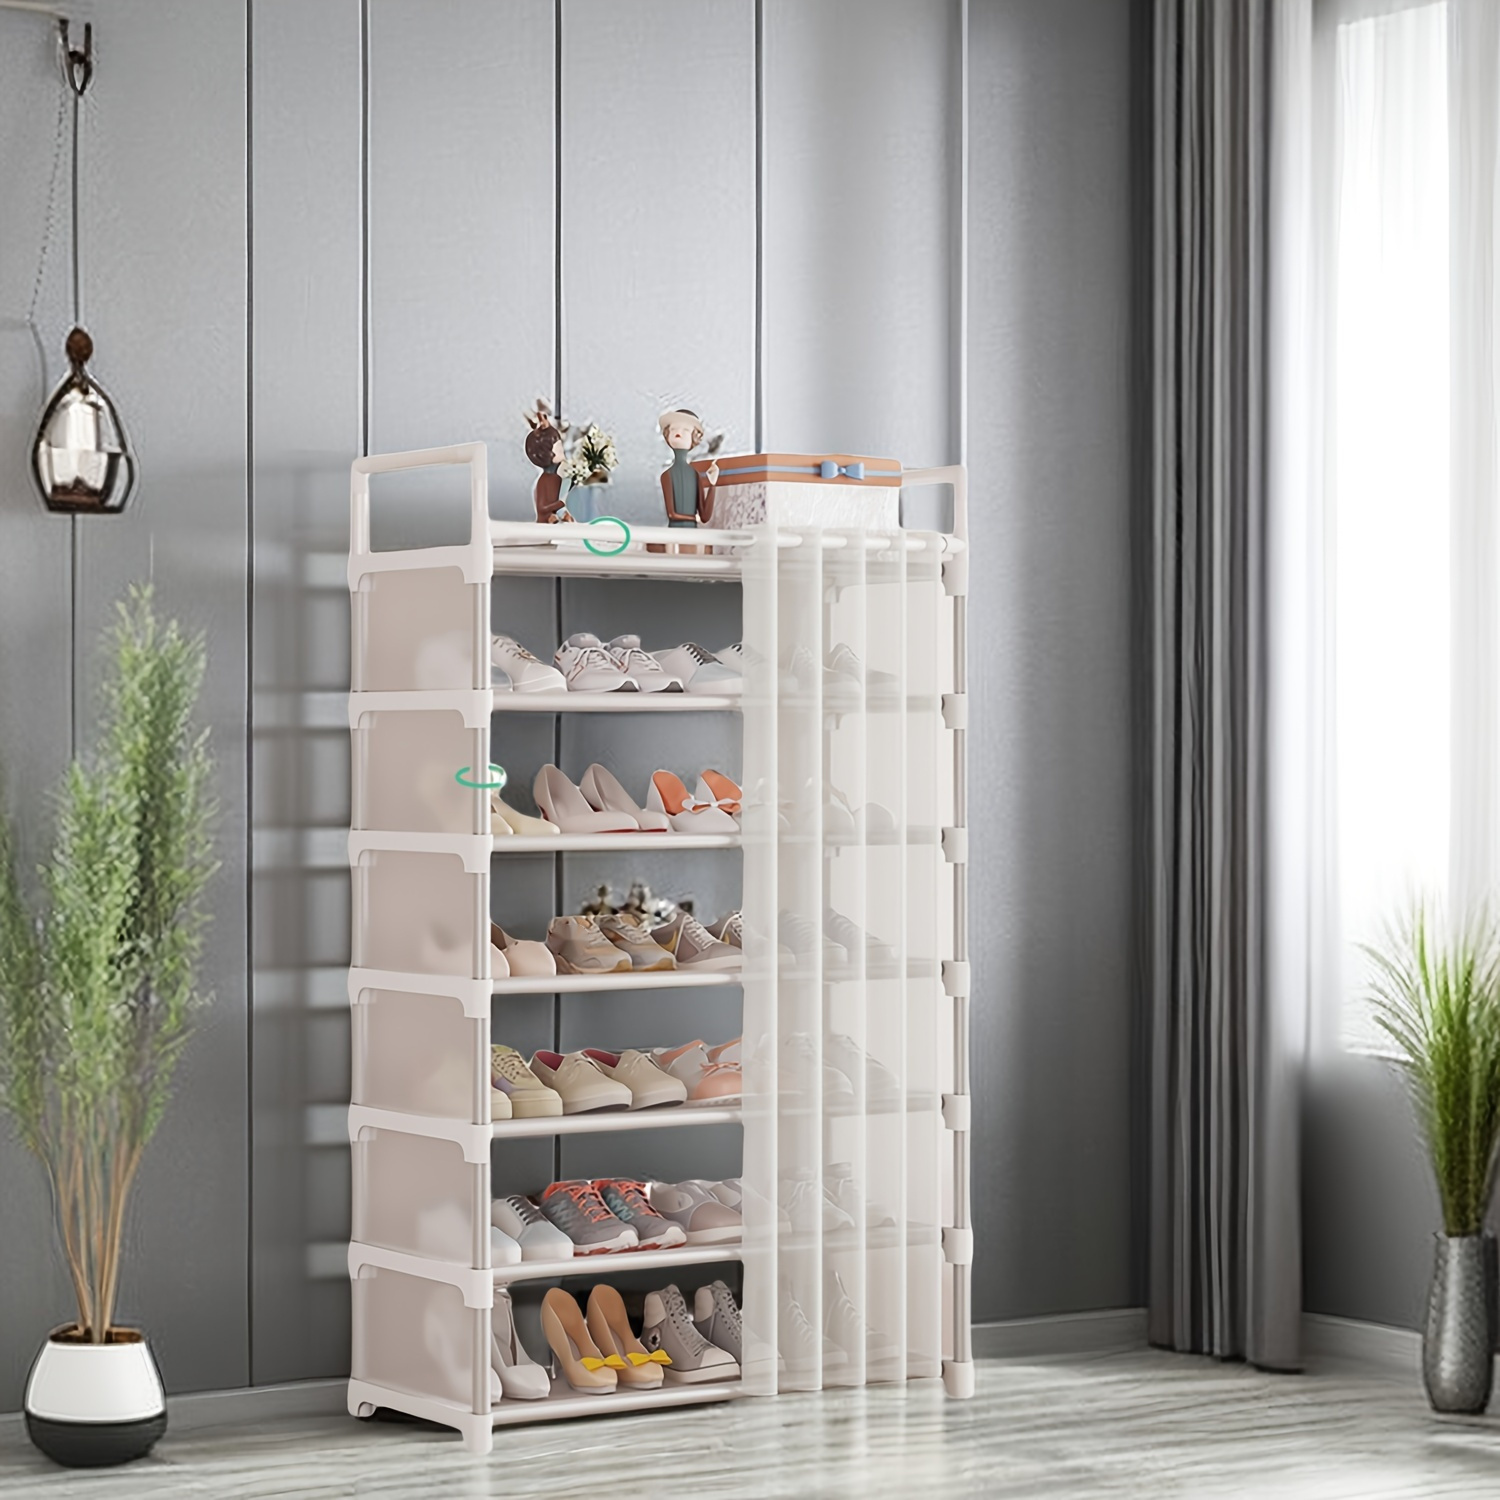 

6-7 Layer Checkered Shelf: 31.5" Extended Simple Assembly Dustproof Shoe Rack - Multifunctional Storage Rack For Home Use